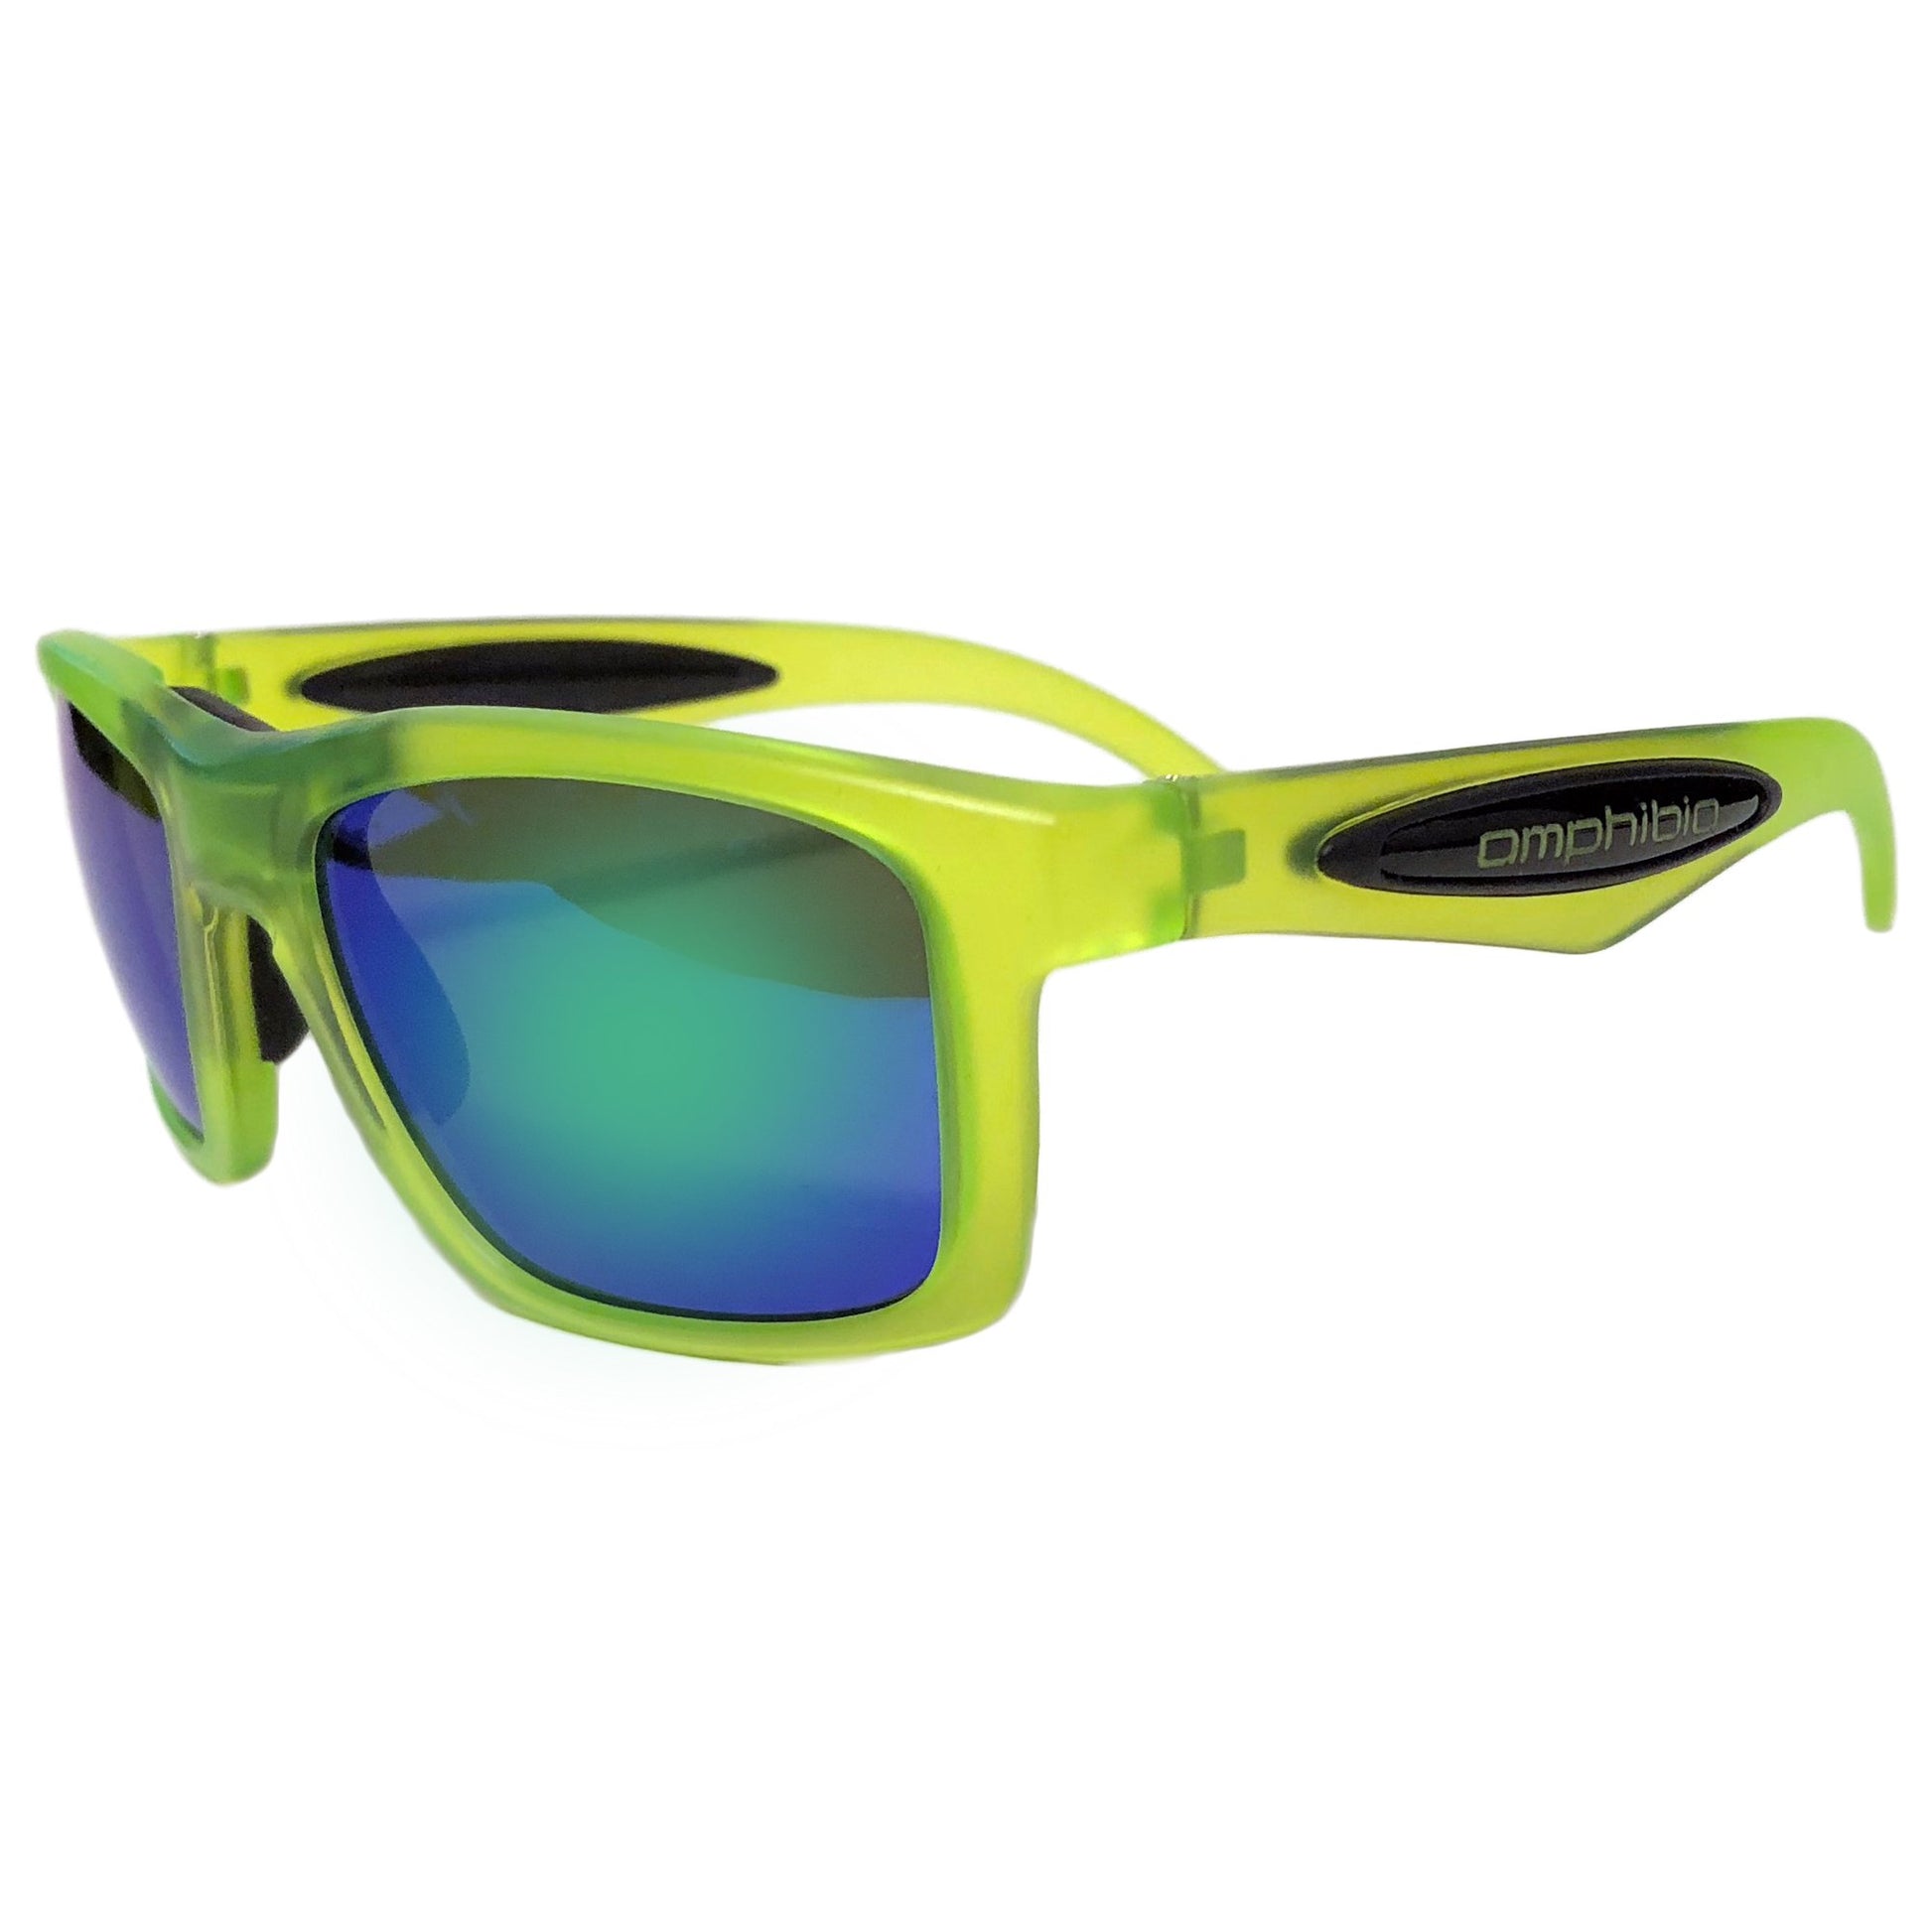 Neon Green Liquid Frame with Blue Storm Lens